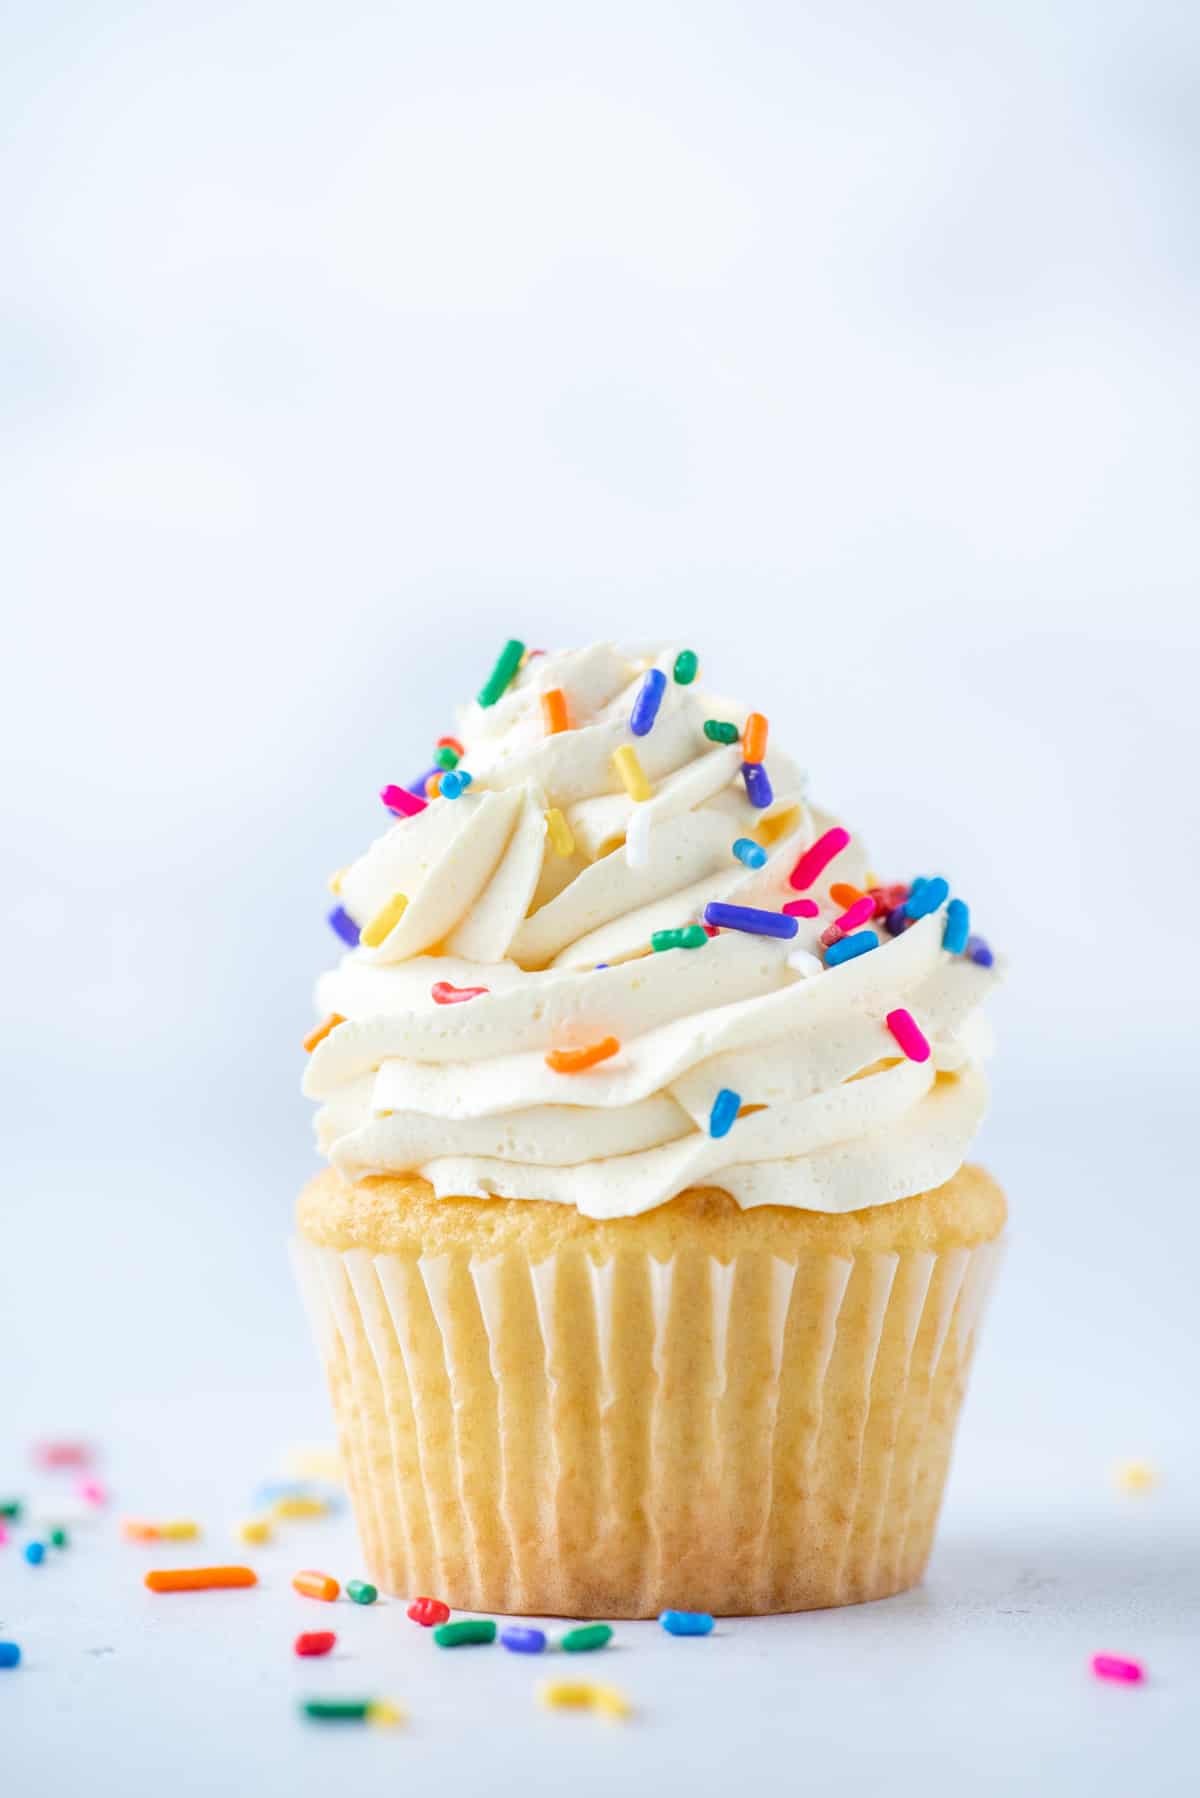 vanilla cupcake topped with cool whip frosting and sprinkles with sprinkles around it on a white surface